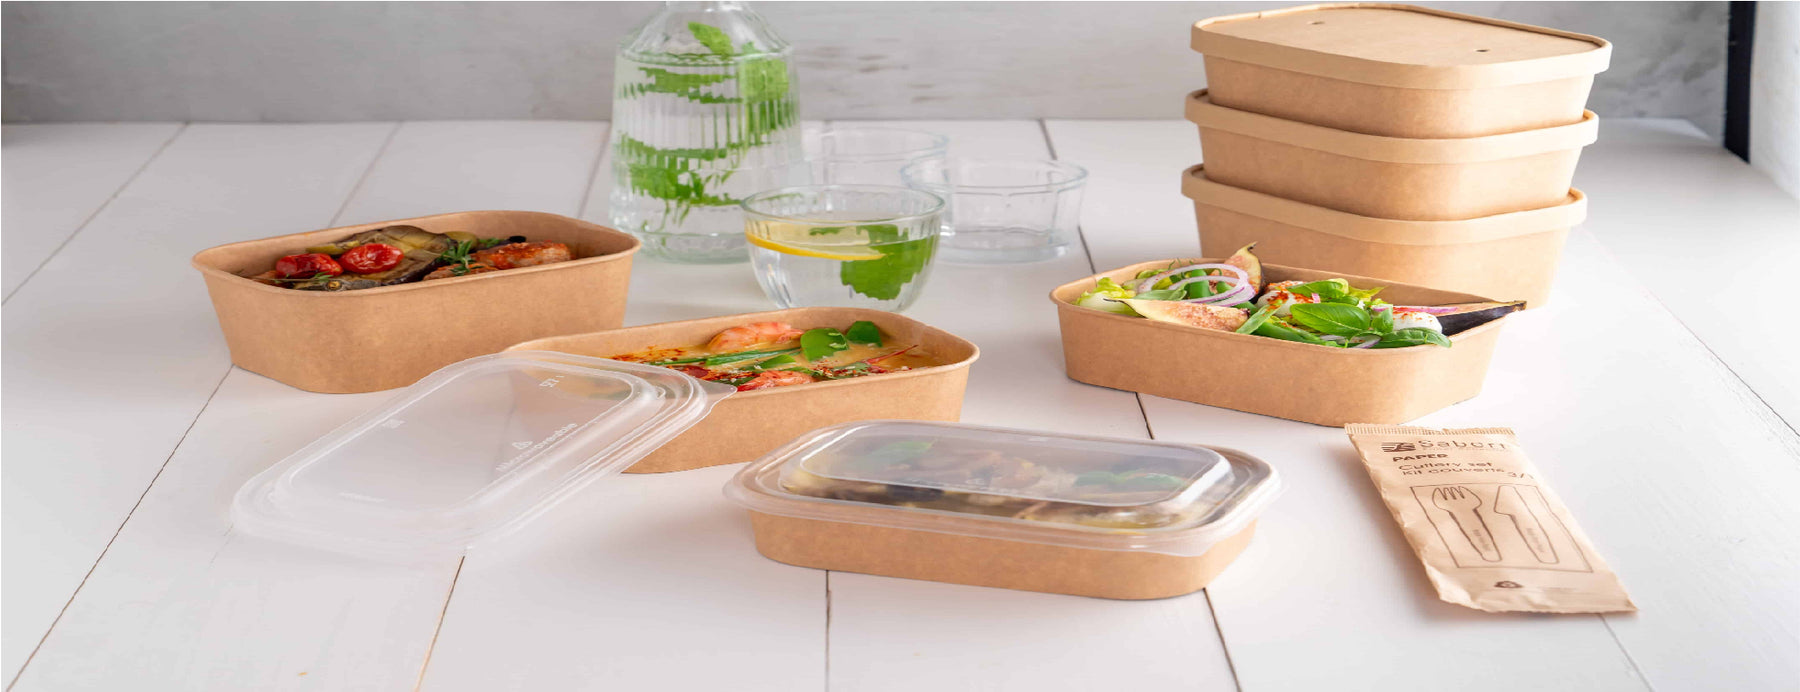 Packman's Food Packaging: Embracing Efficiency: The Rectangular Food Tub Revolution